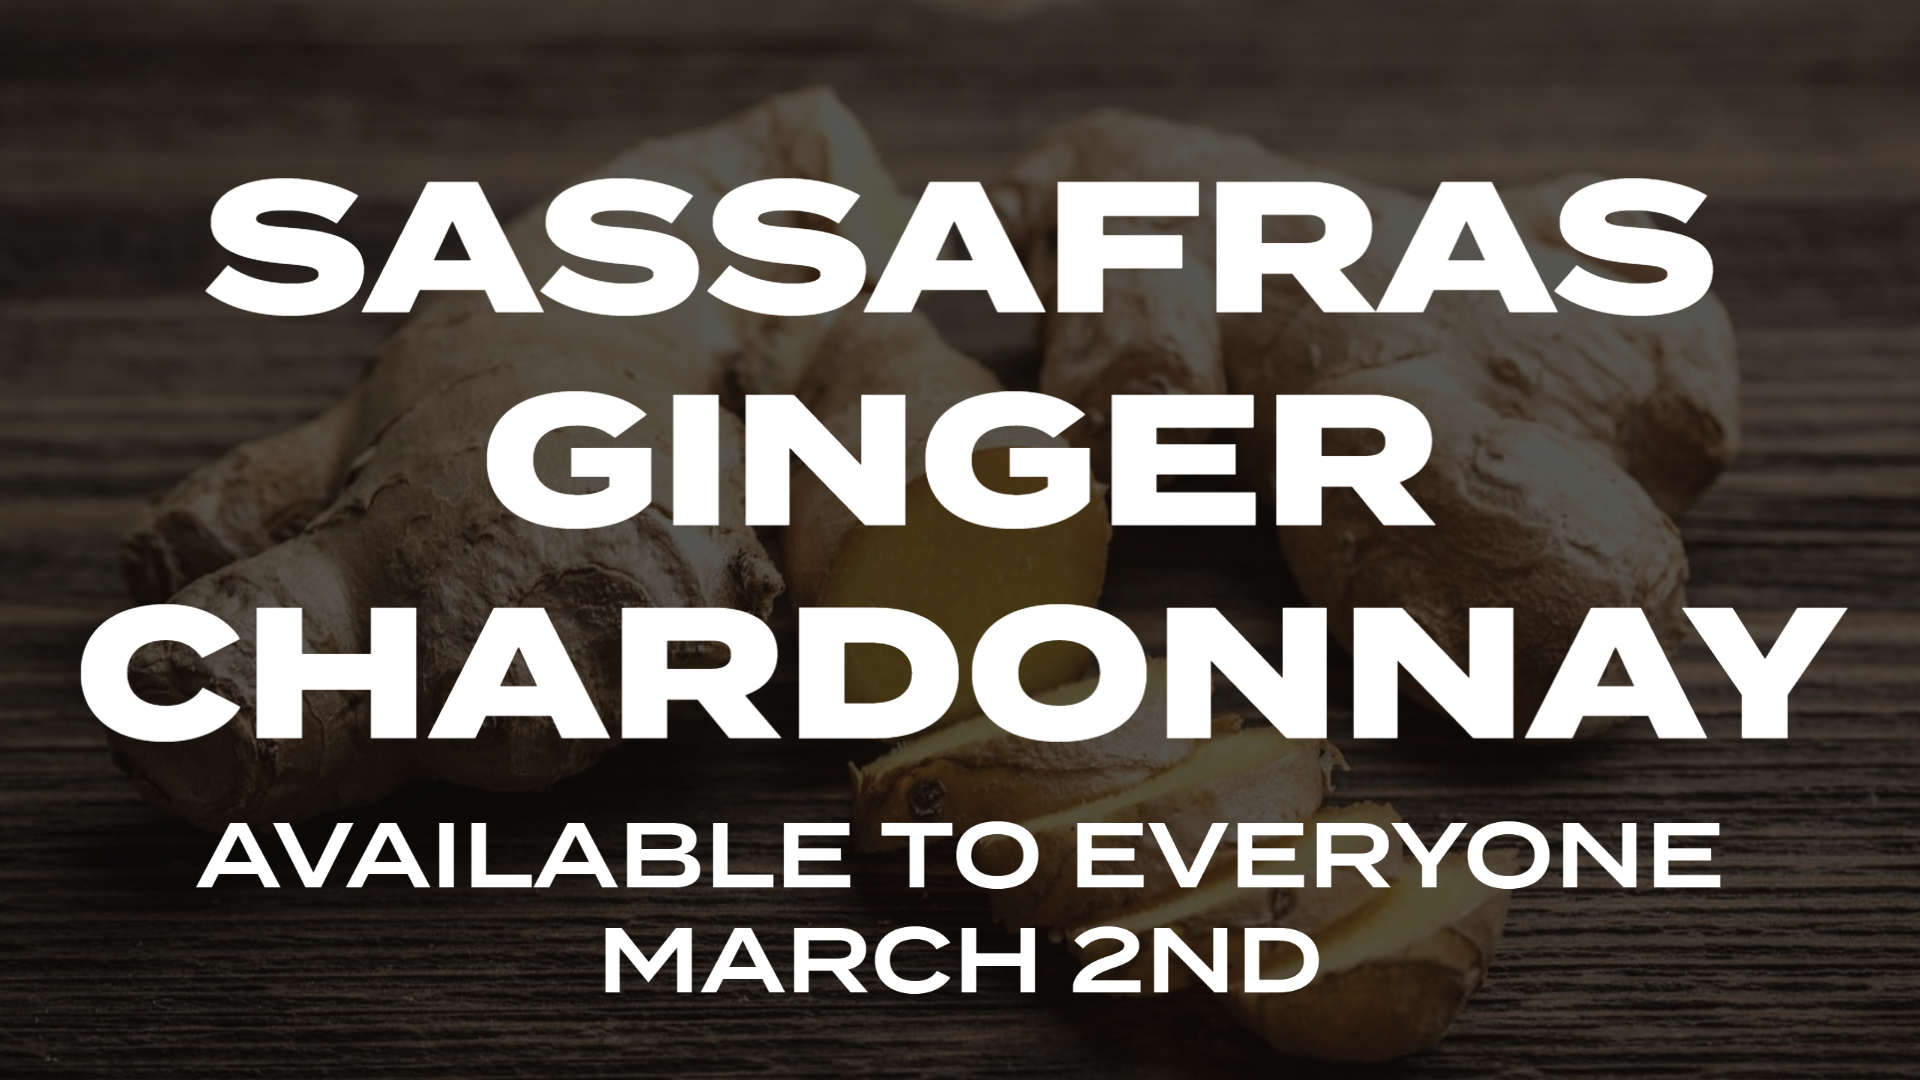 You are currently viewing Sassafras Ginger Chardonnay Loyalty & Public Release